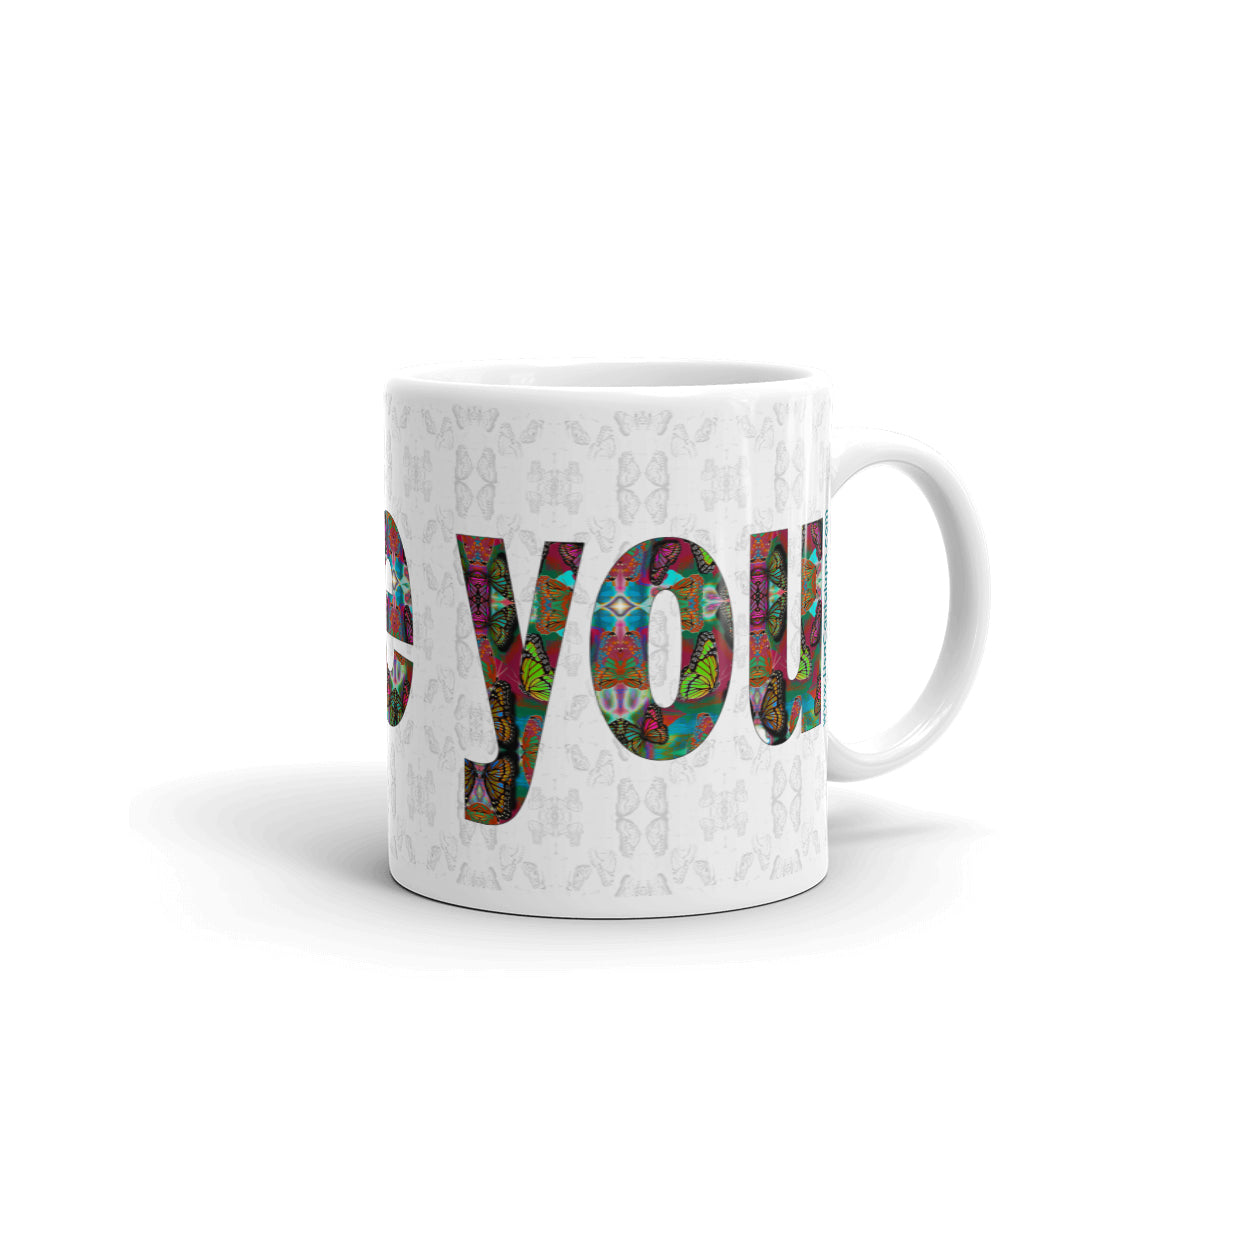 I Love You ~ LOVE ETERNAL Ceramic Mug; Colorful Butterflies Printed Words, Valentine's Day Gift